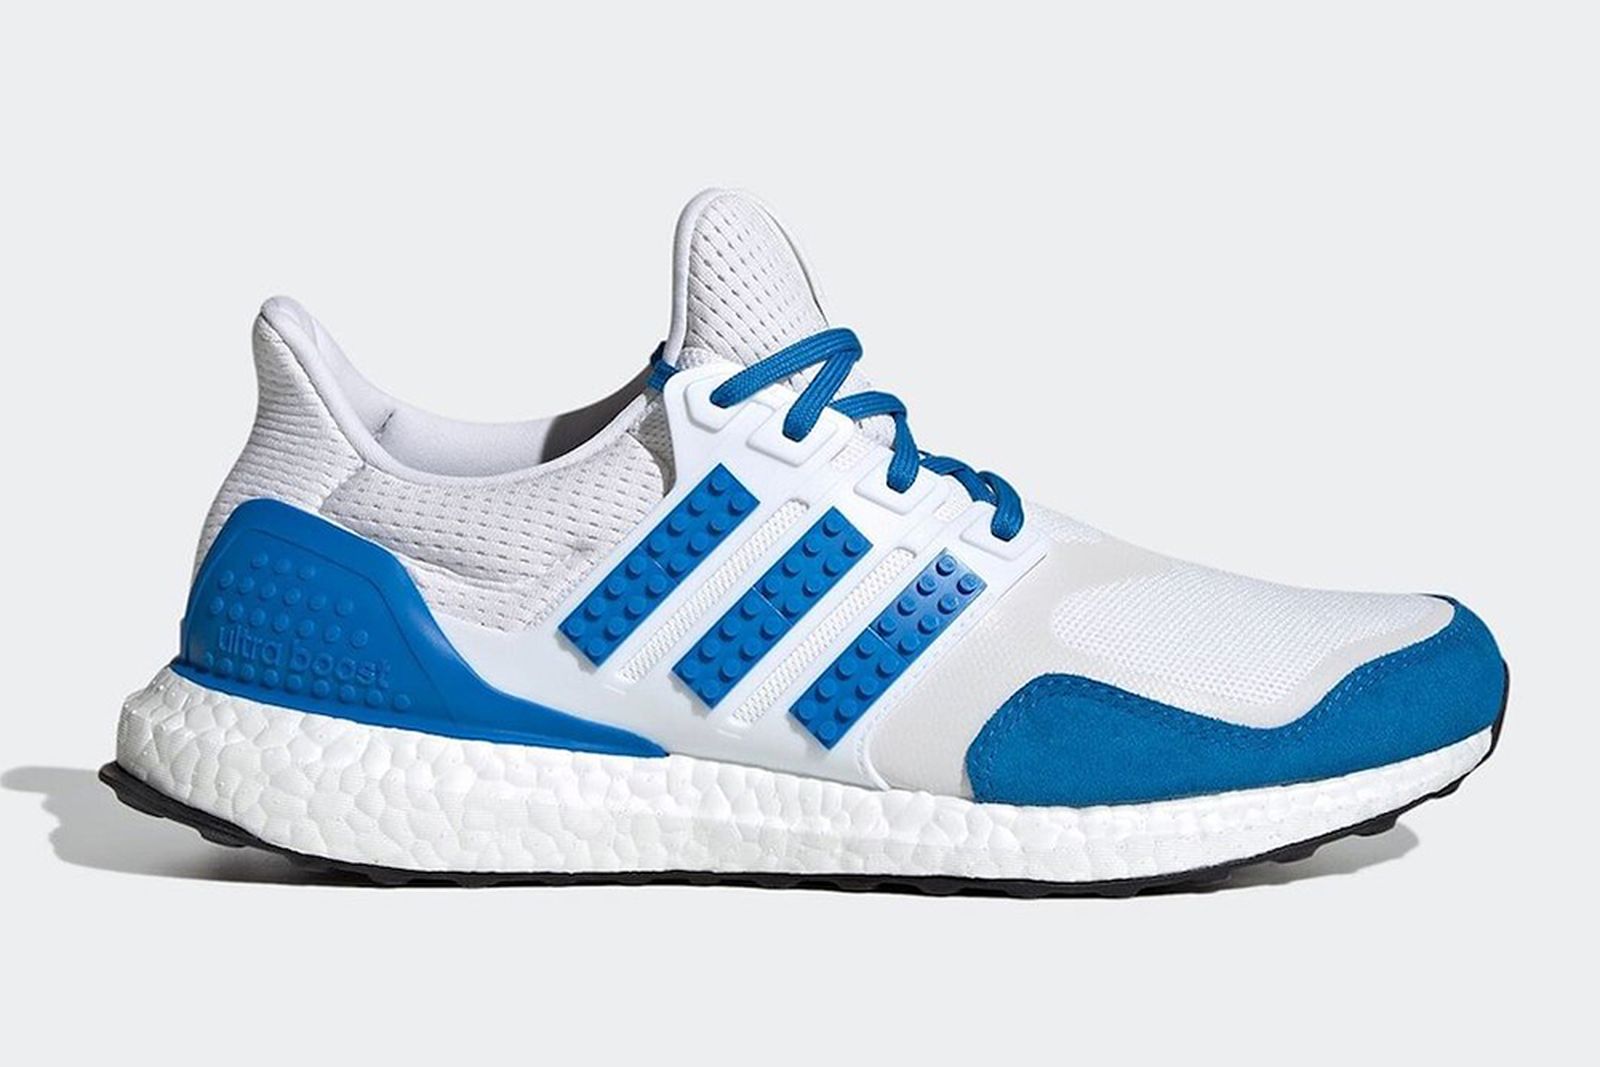 lego-adidas-ultraboost-color-pack-release-date-price-05